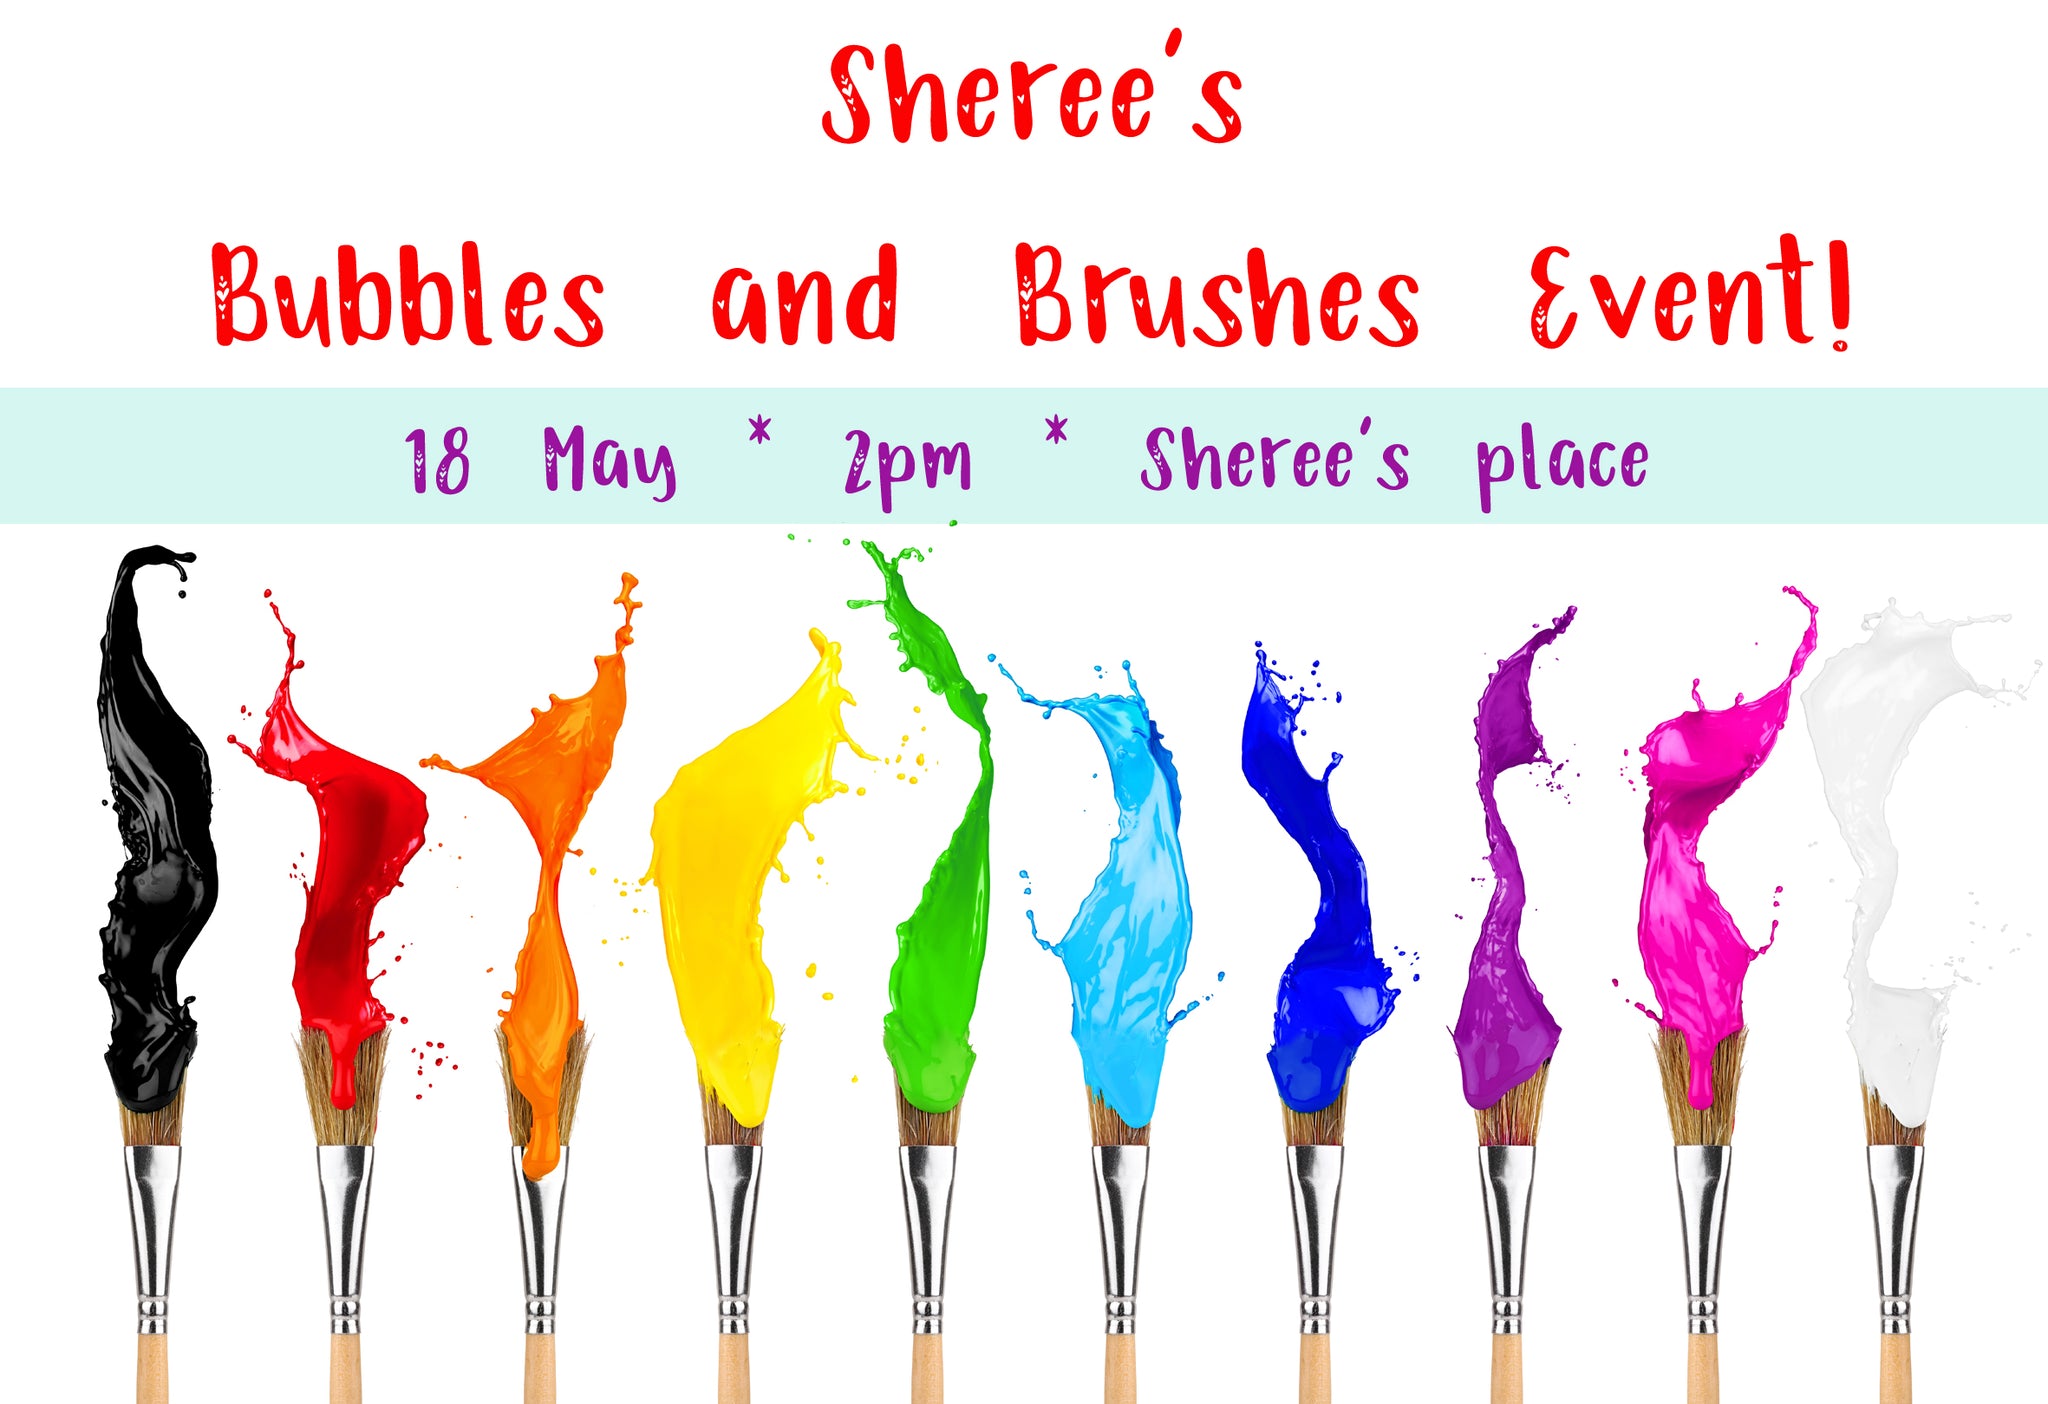 Sheree's Bubbles and Brushes Event